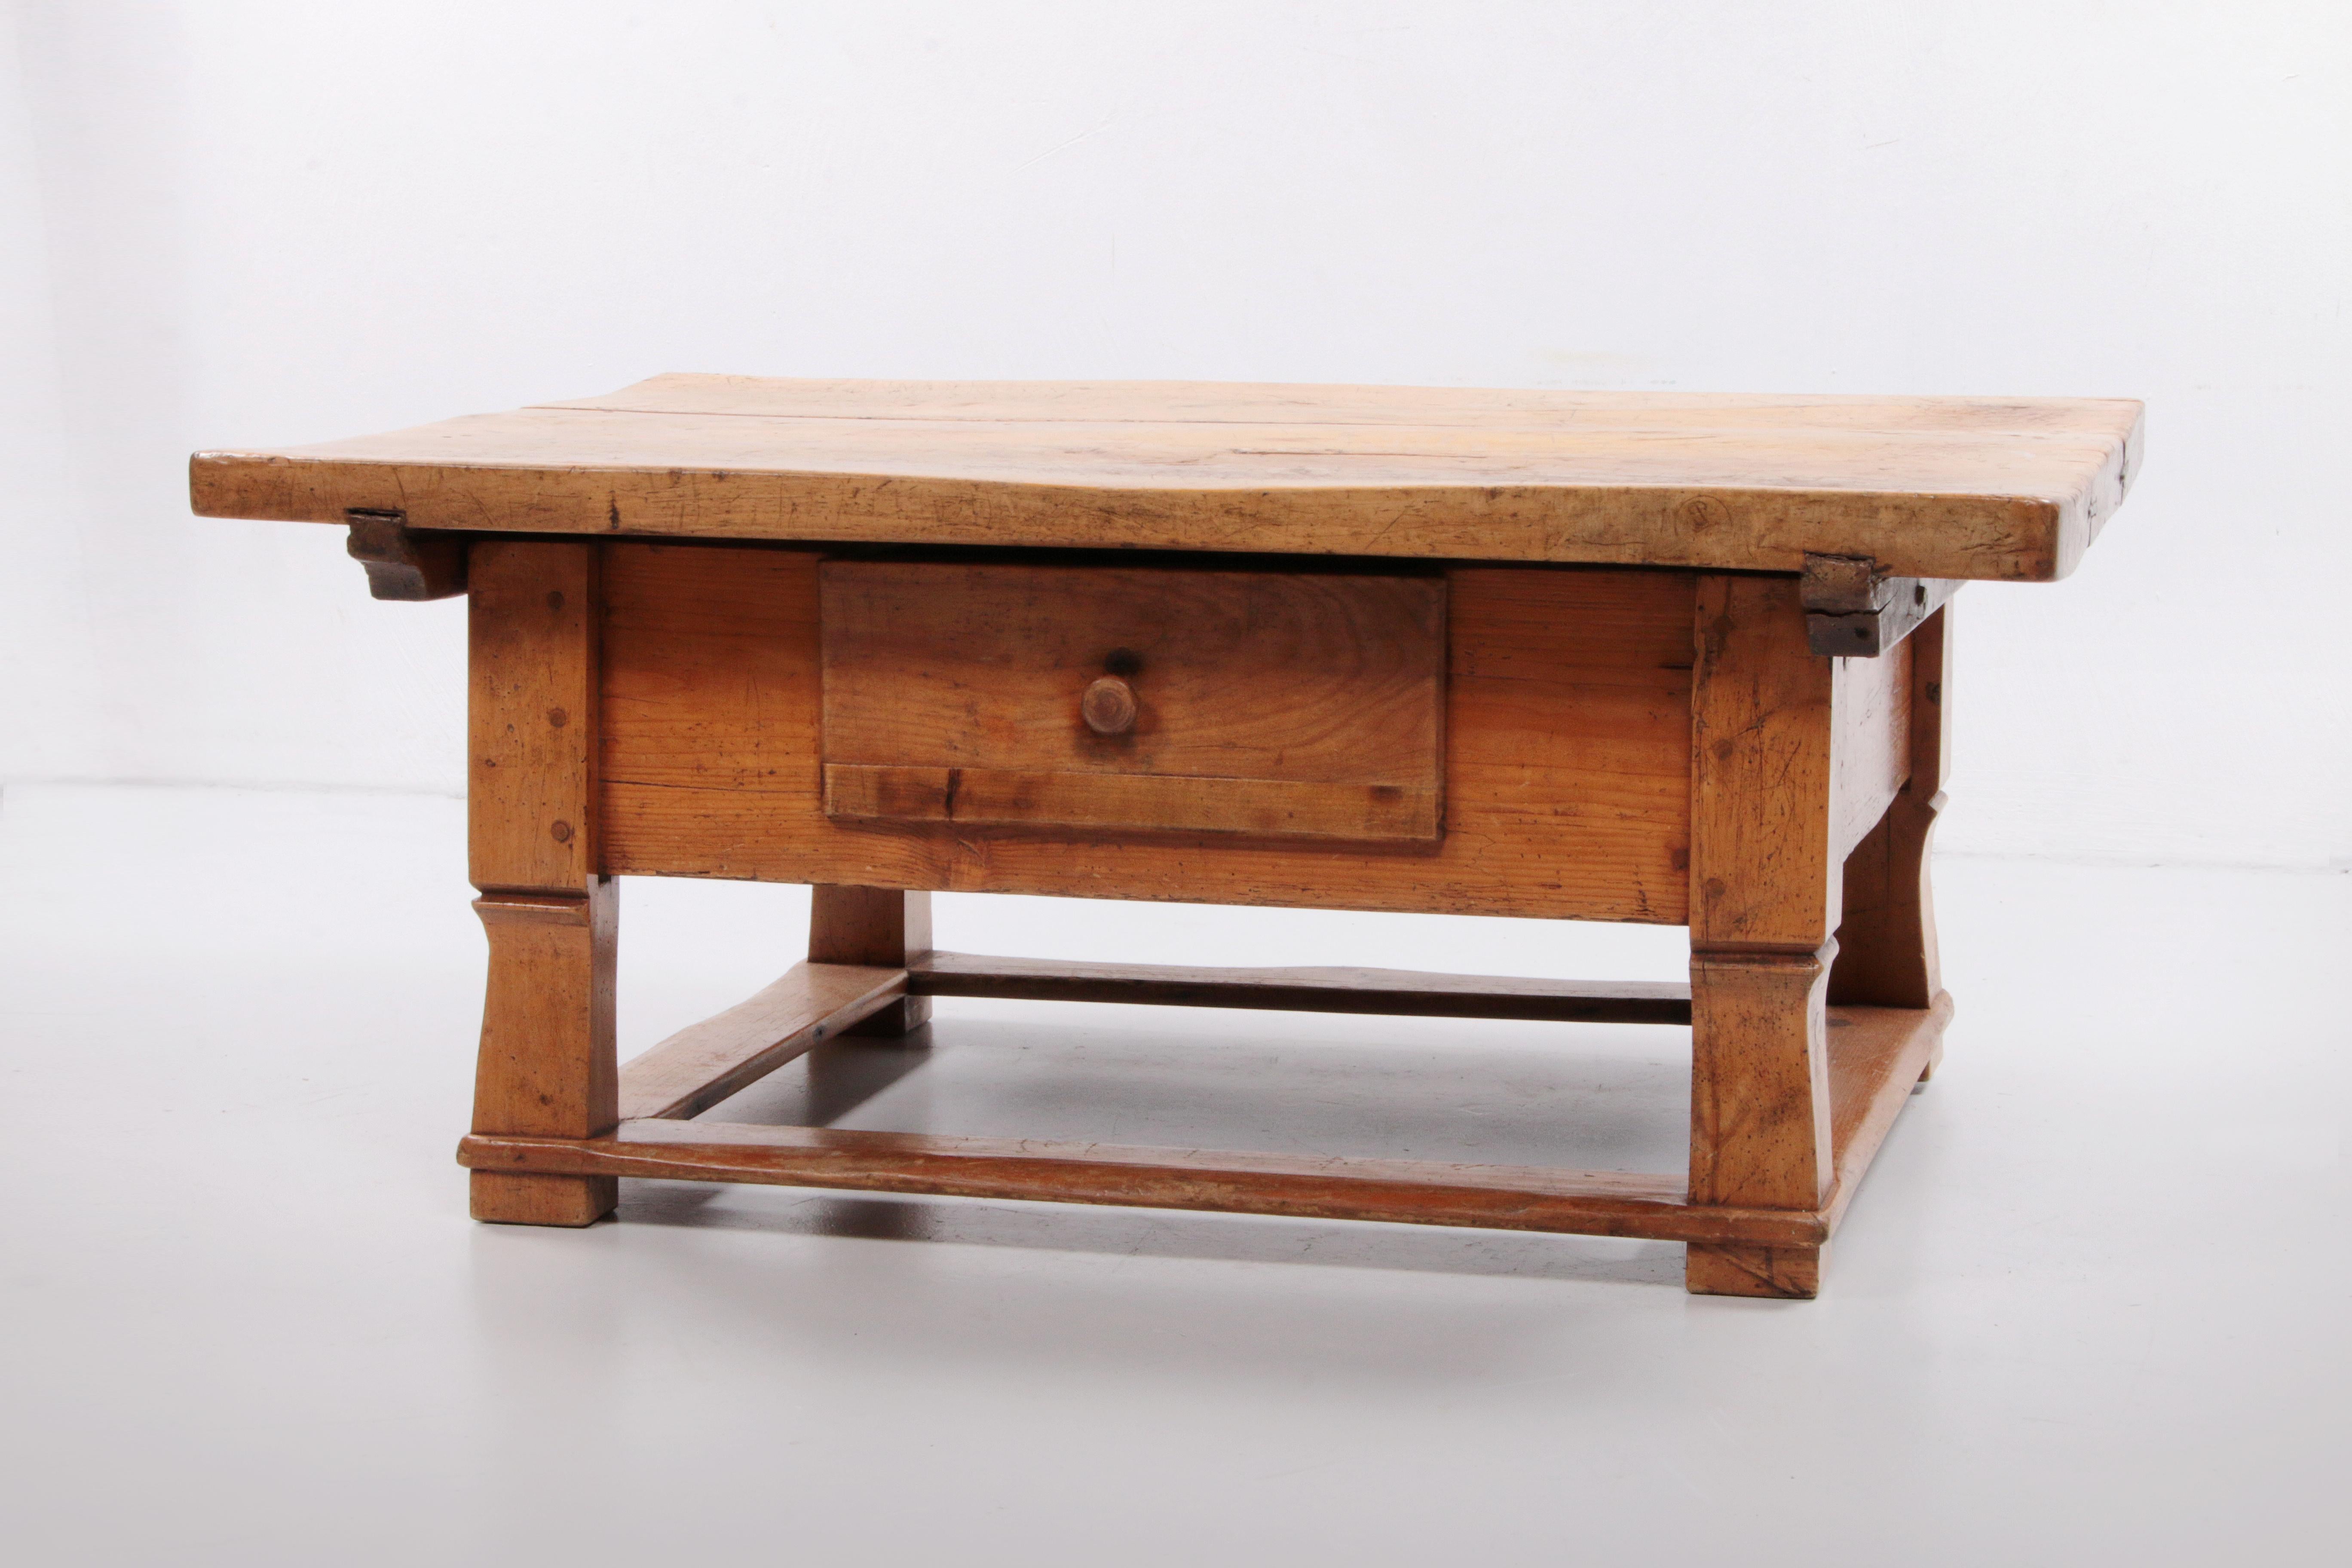 Austrian Coffee Table18- 19th Century Walnut Payment Table with Drawer, Austria For Sale 3